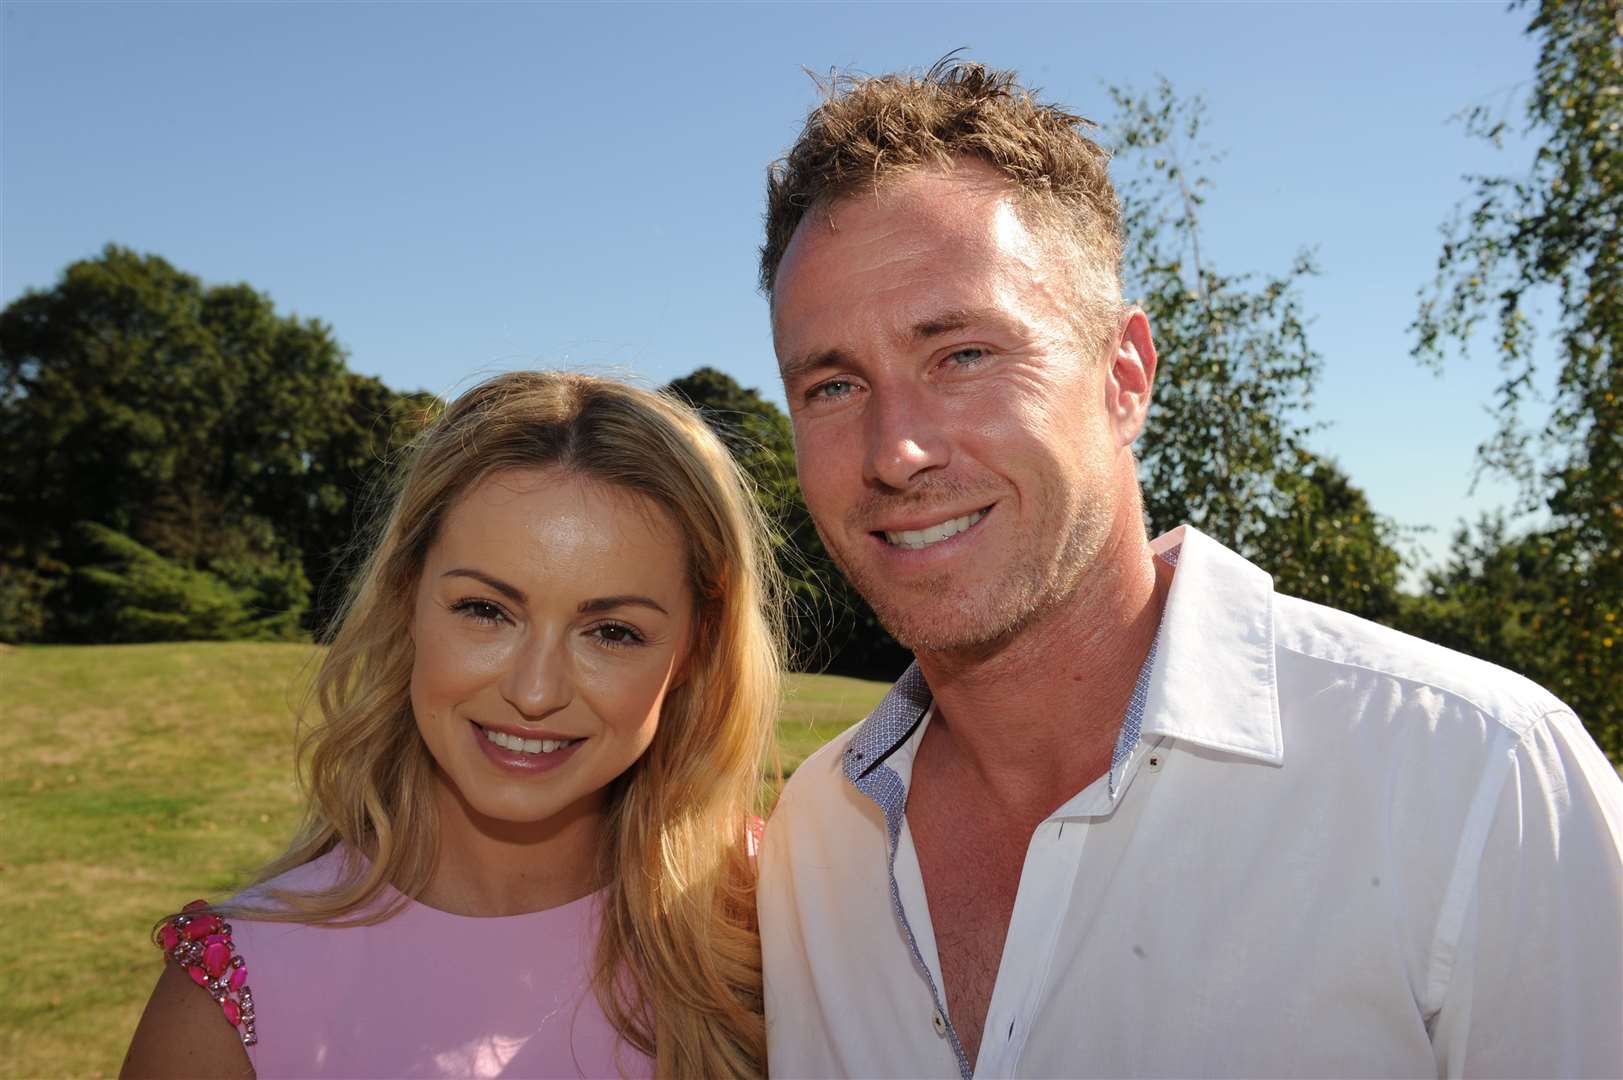 James and Ola Jordan, who live near Maidstone, will appear on ITV's Strictly the Real Full Monty